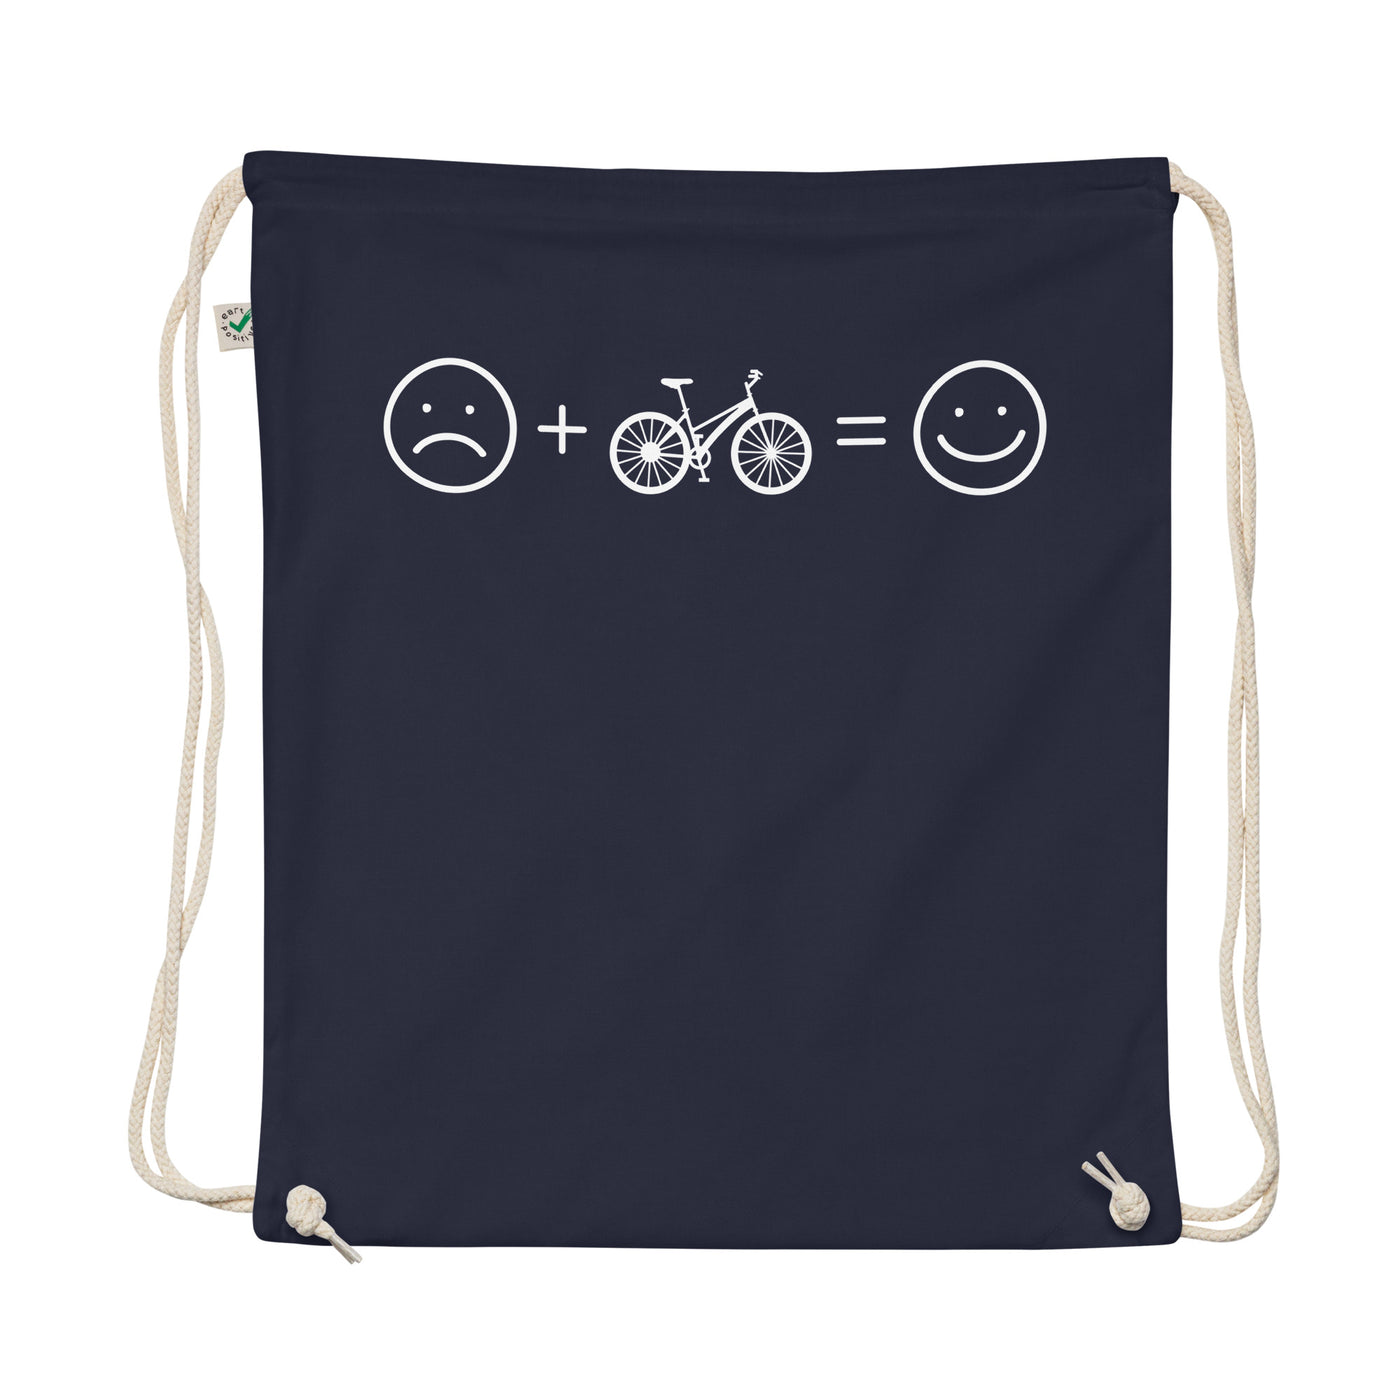 Smile Face And Bicycle - Organic Turnbeutel fahrrad